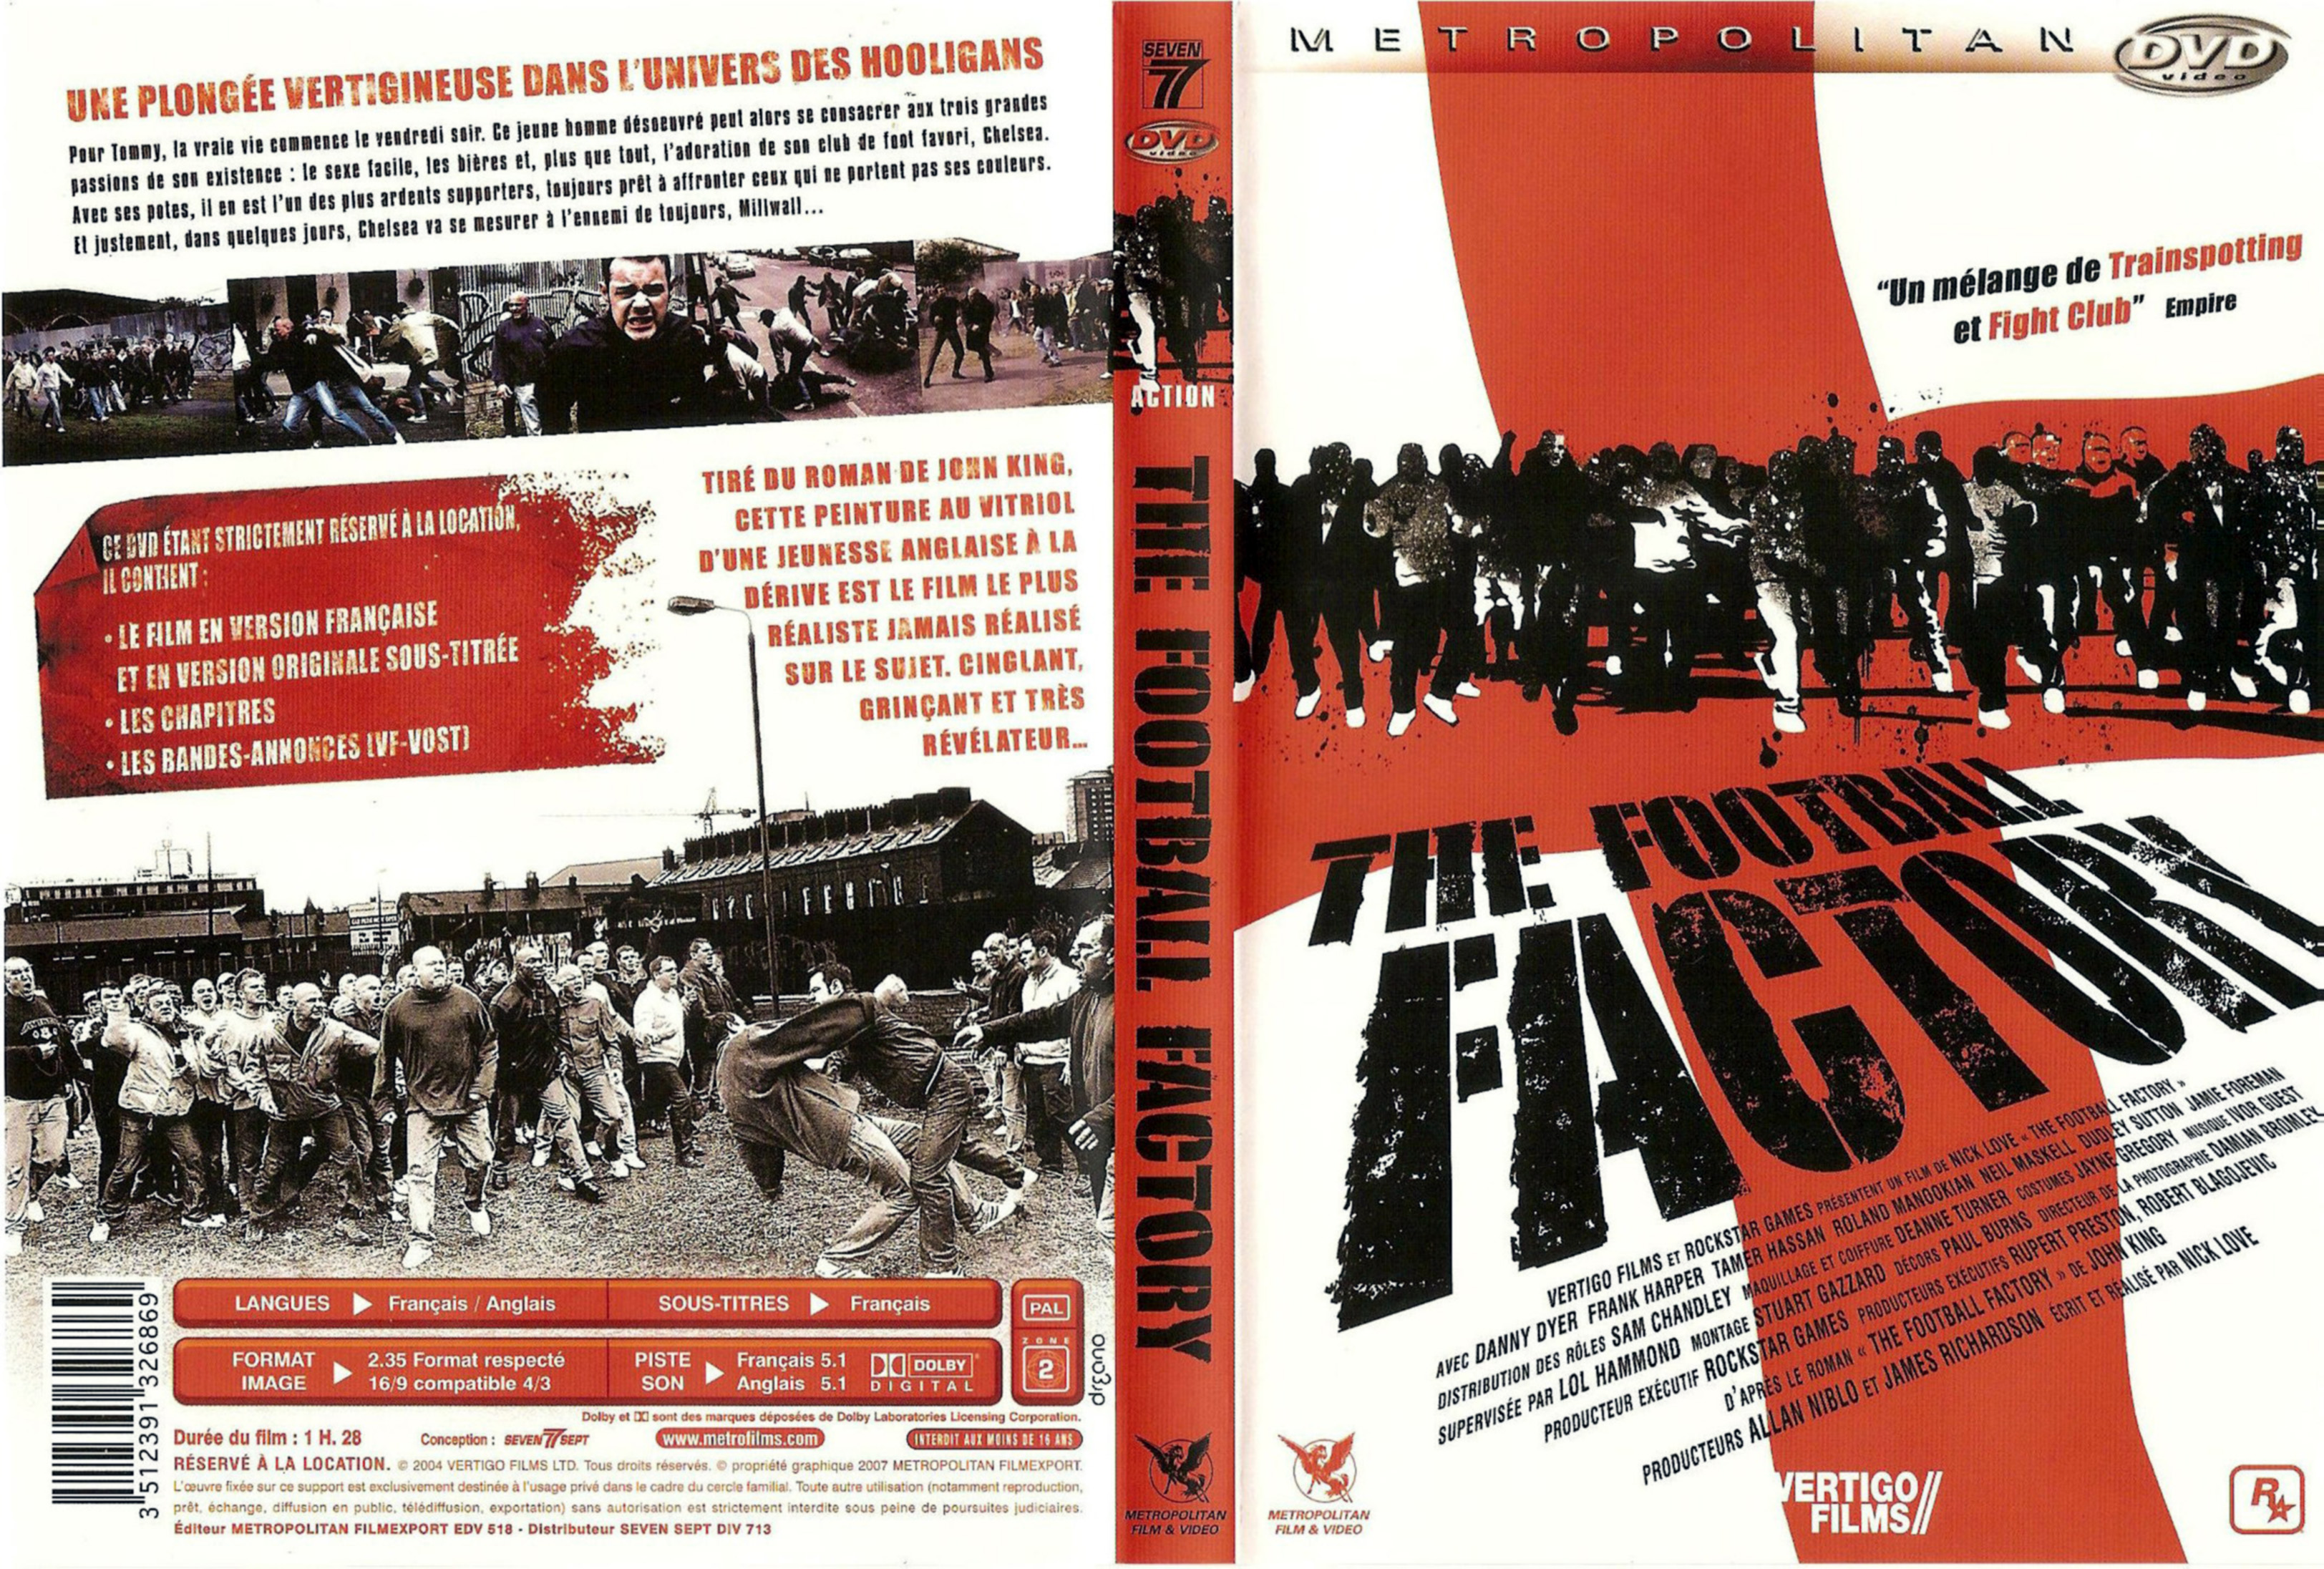 Jaquette DVD The football factory